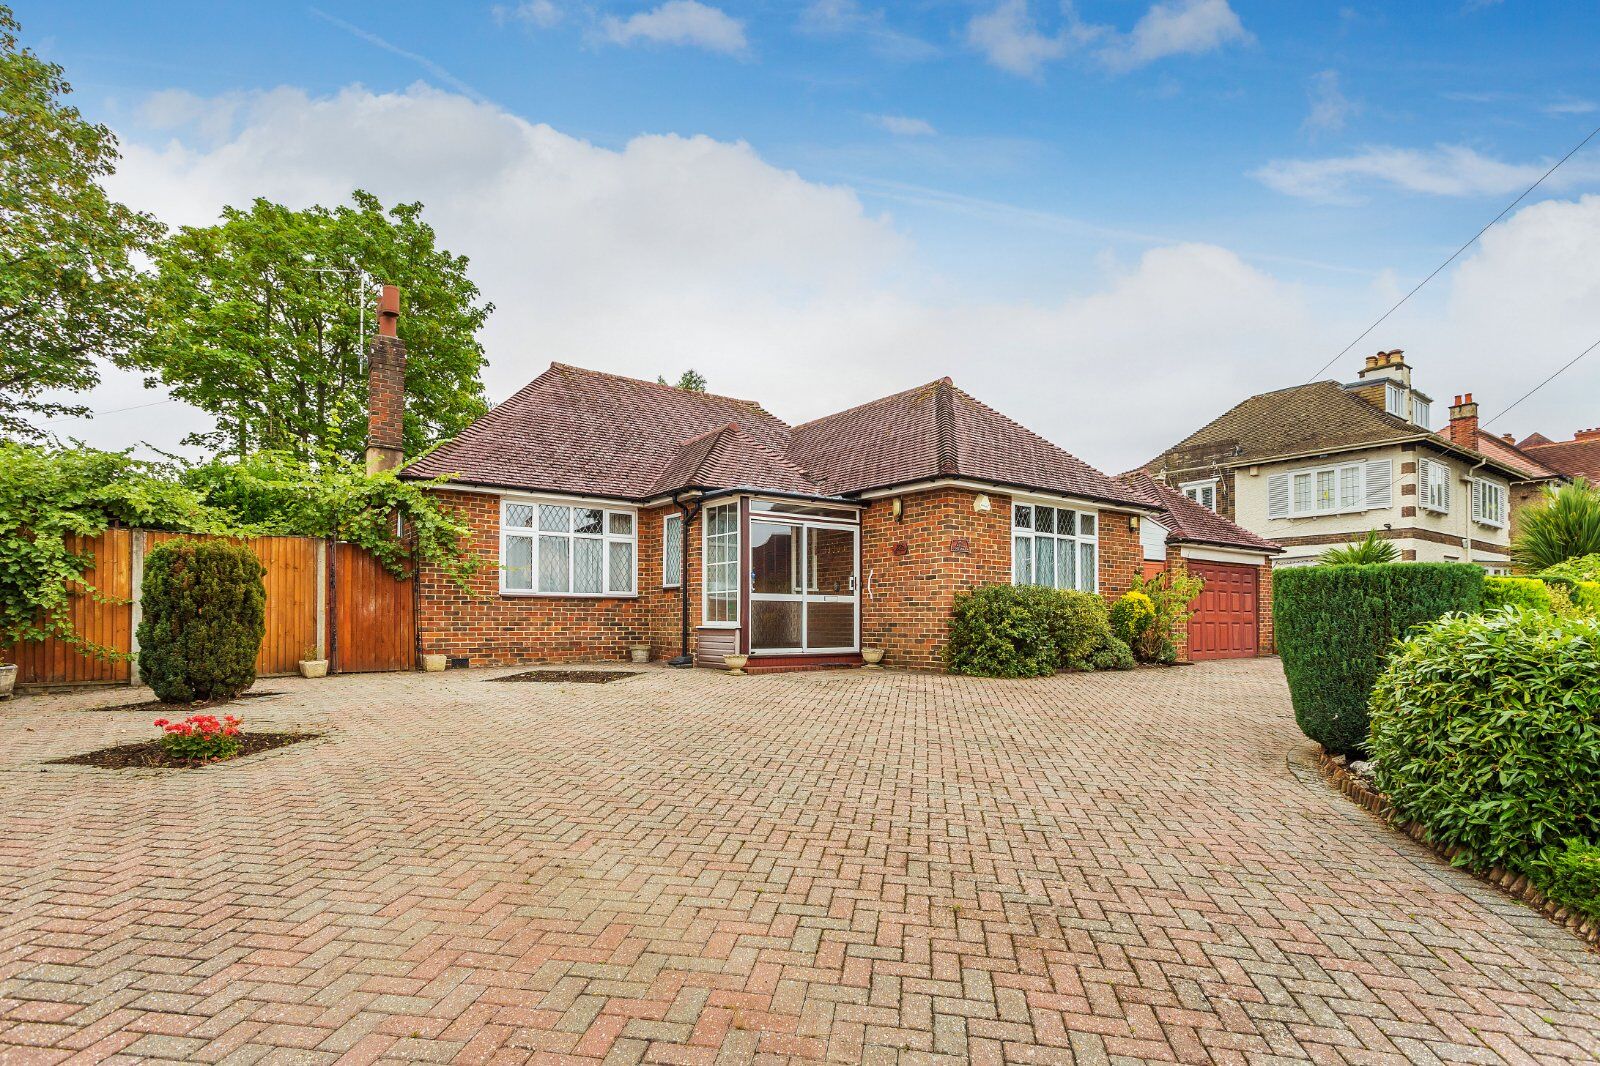 2 bedroom detached bungalow for sale York Road, Cheam, SM2, main image